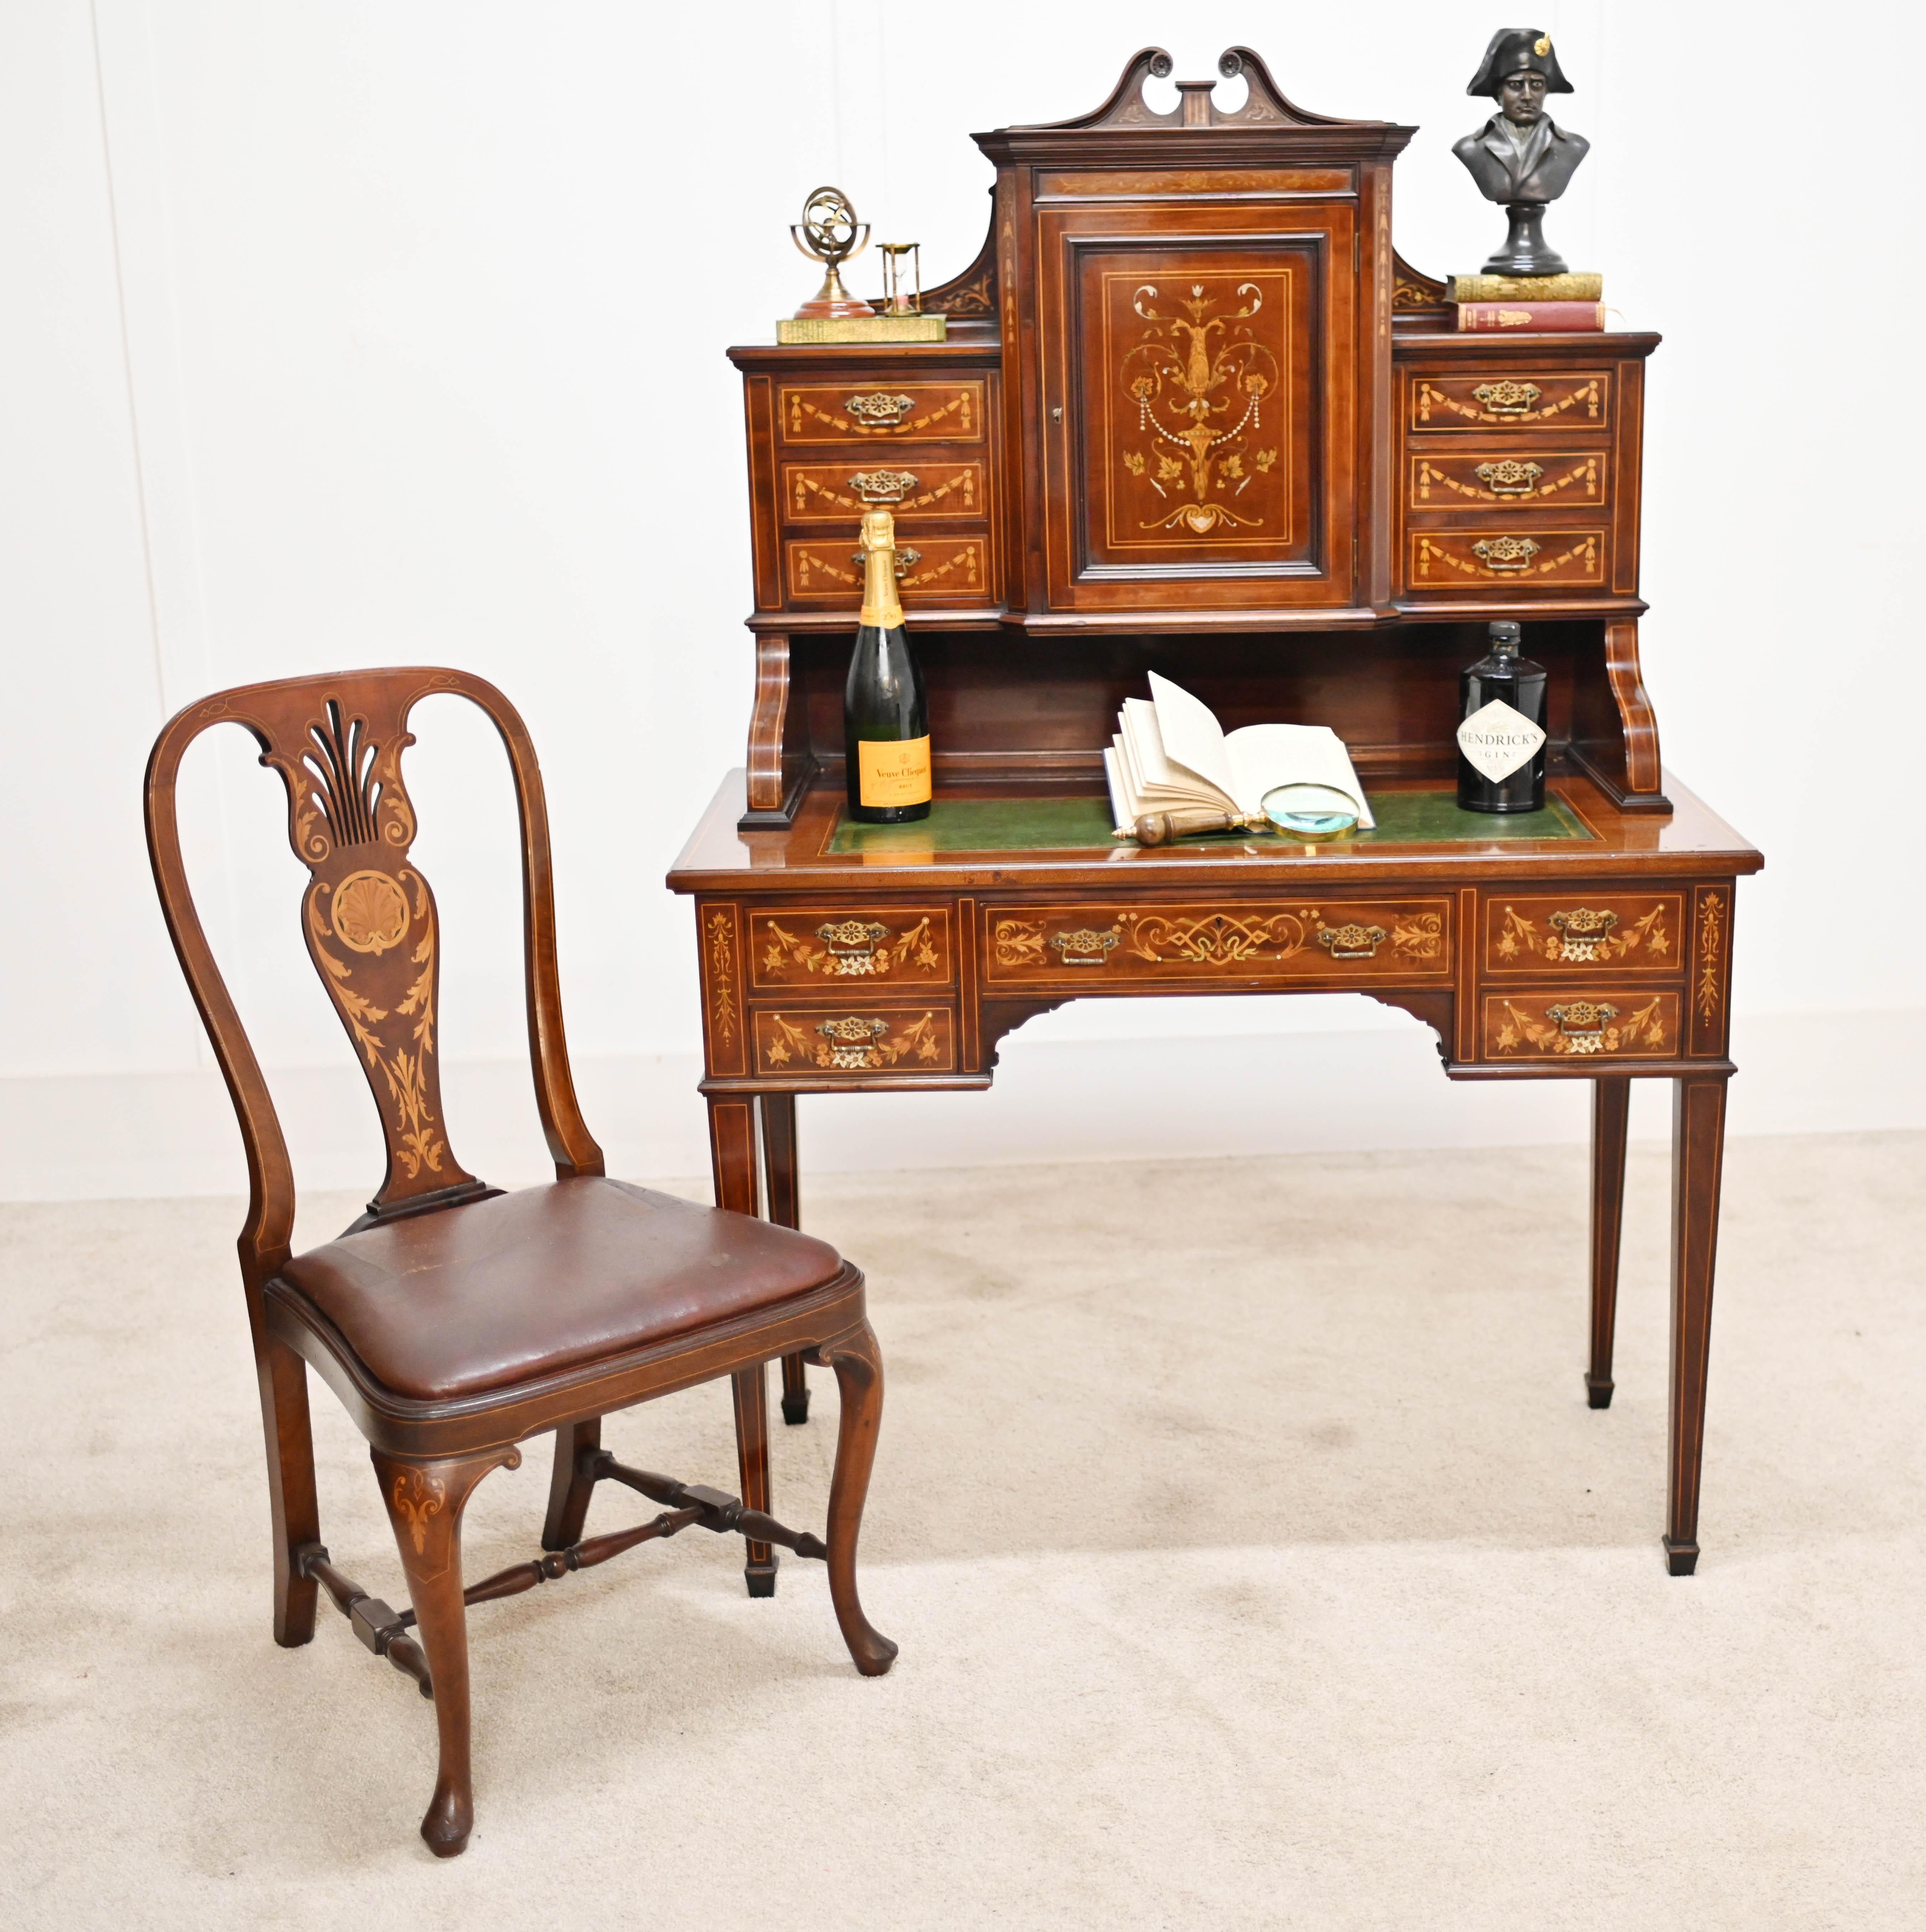 Eye catching Edwardian desk and matching chair set both in mahogany
Circa 1910 and originally made by Maple & Co - please see photo of stamp and makers mark on listing
Extensively inlaid with satinwood boxwood and pearl inlays 
Inlay work on chair